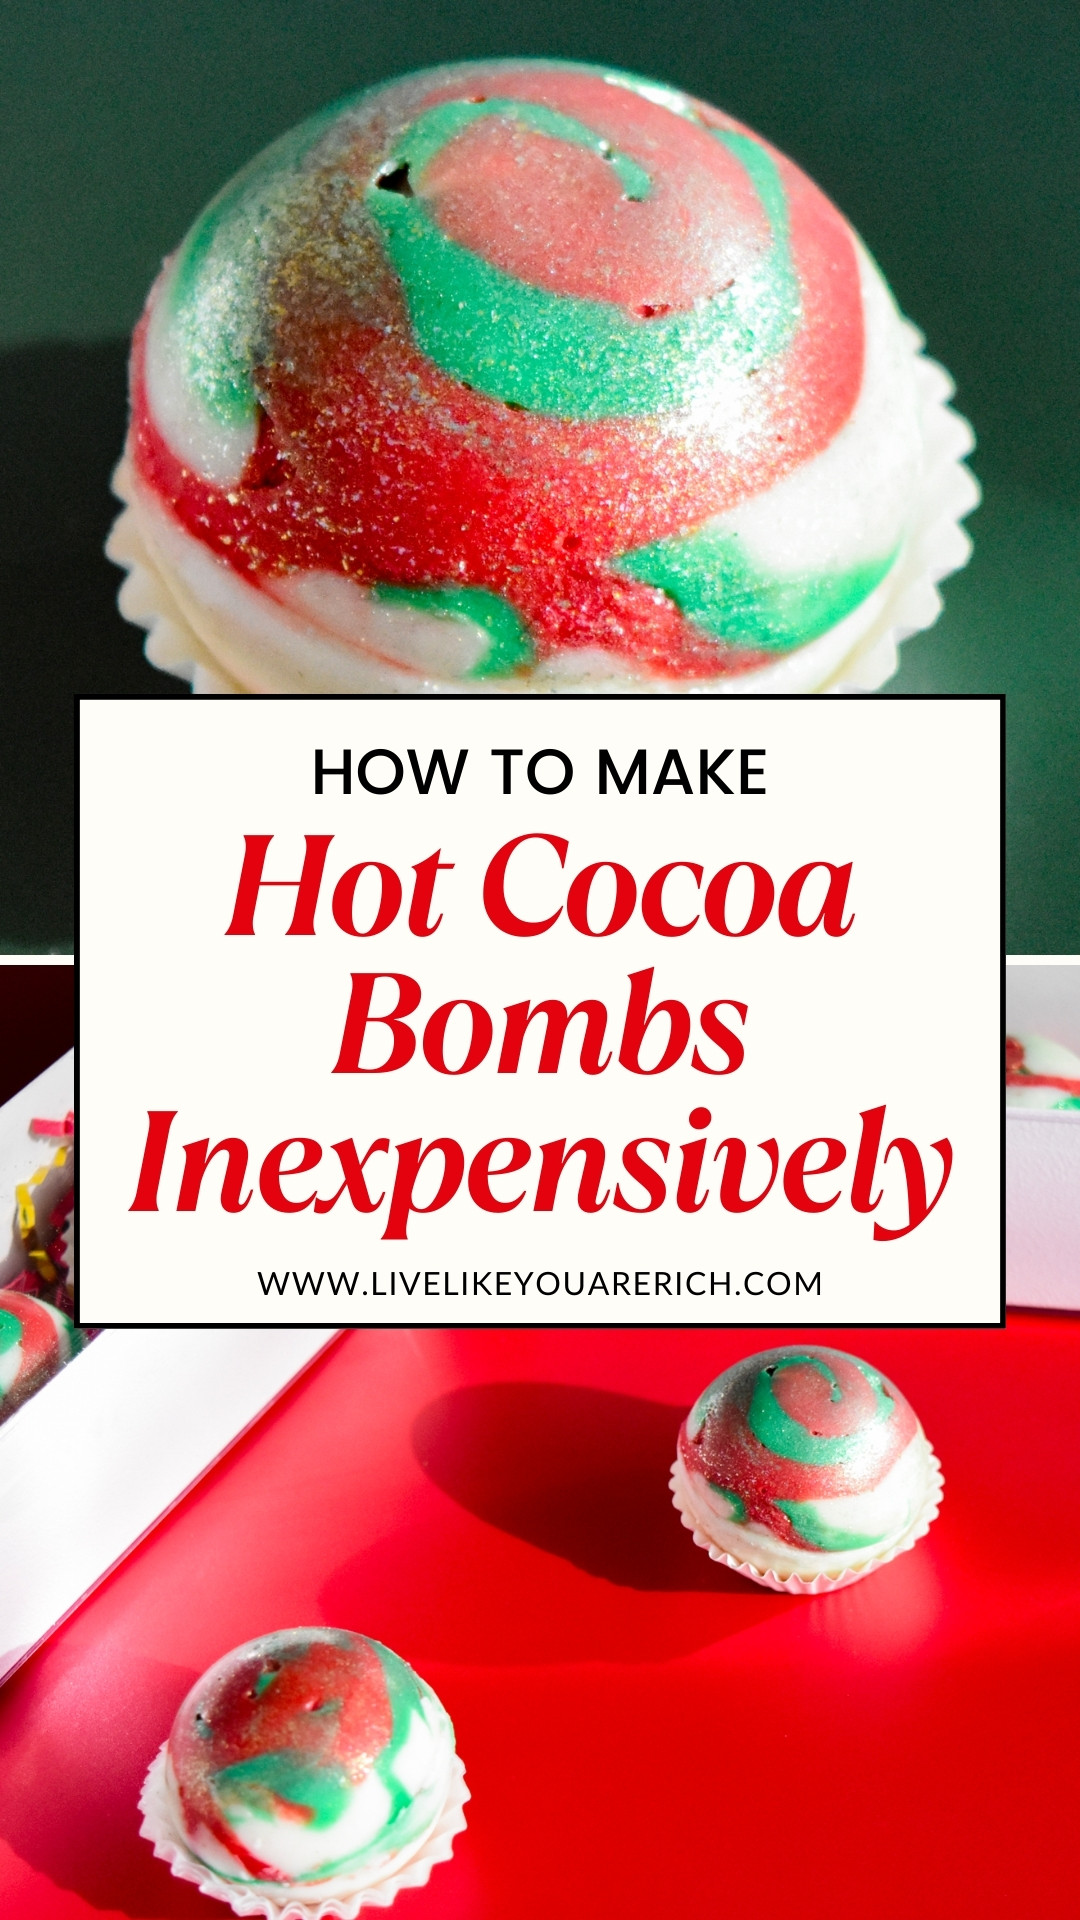 How to Make Hot Cocoa Bombs Inexpensively